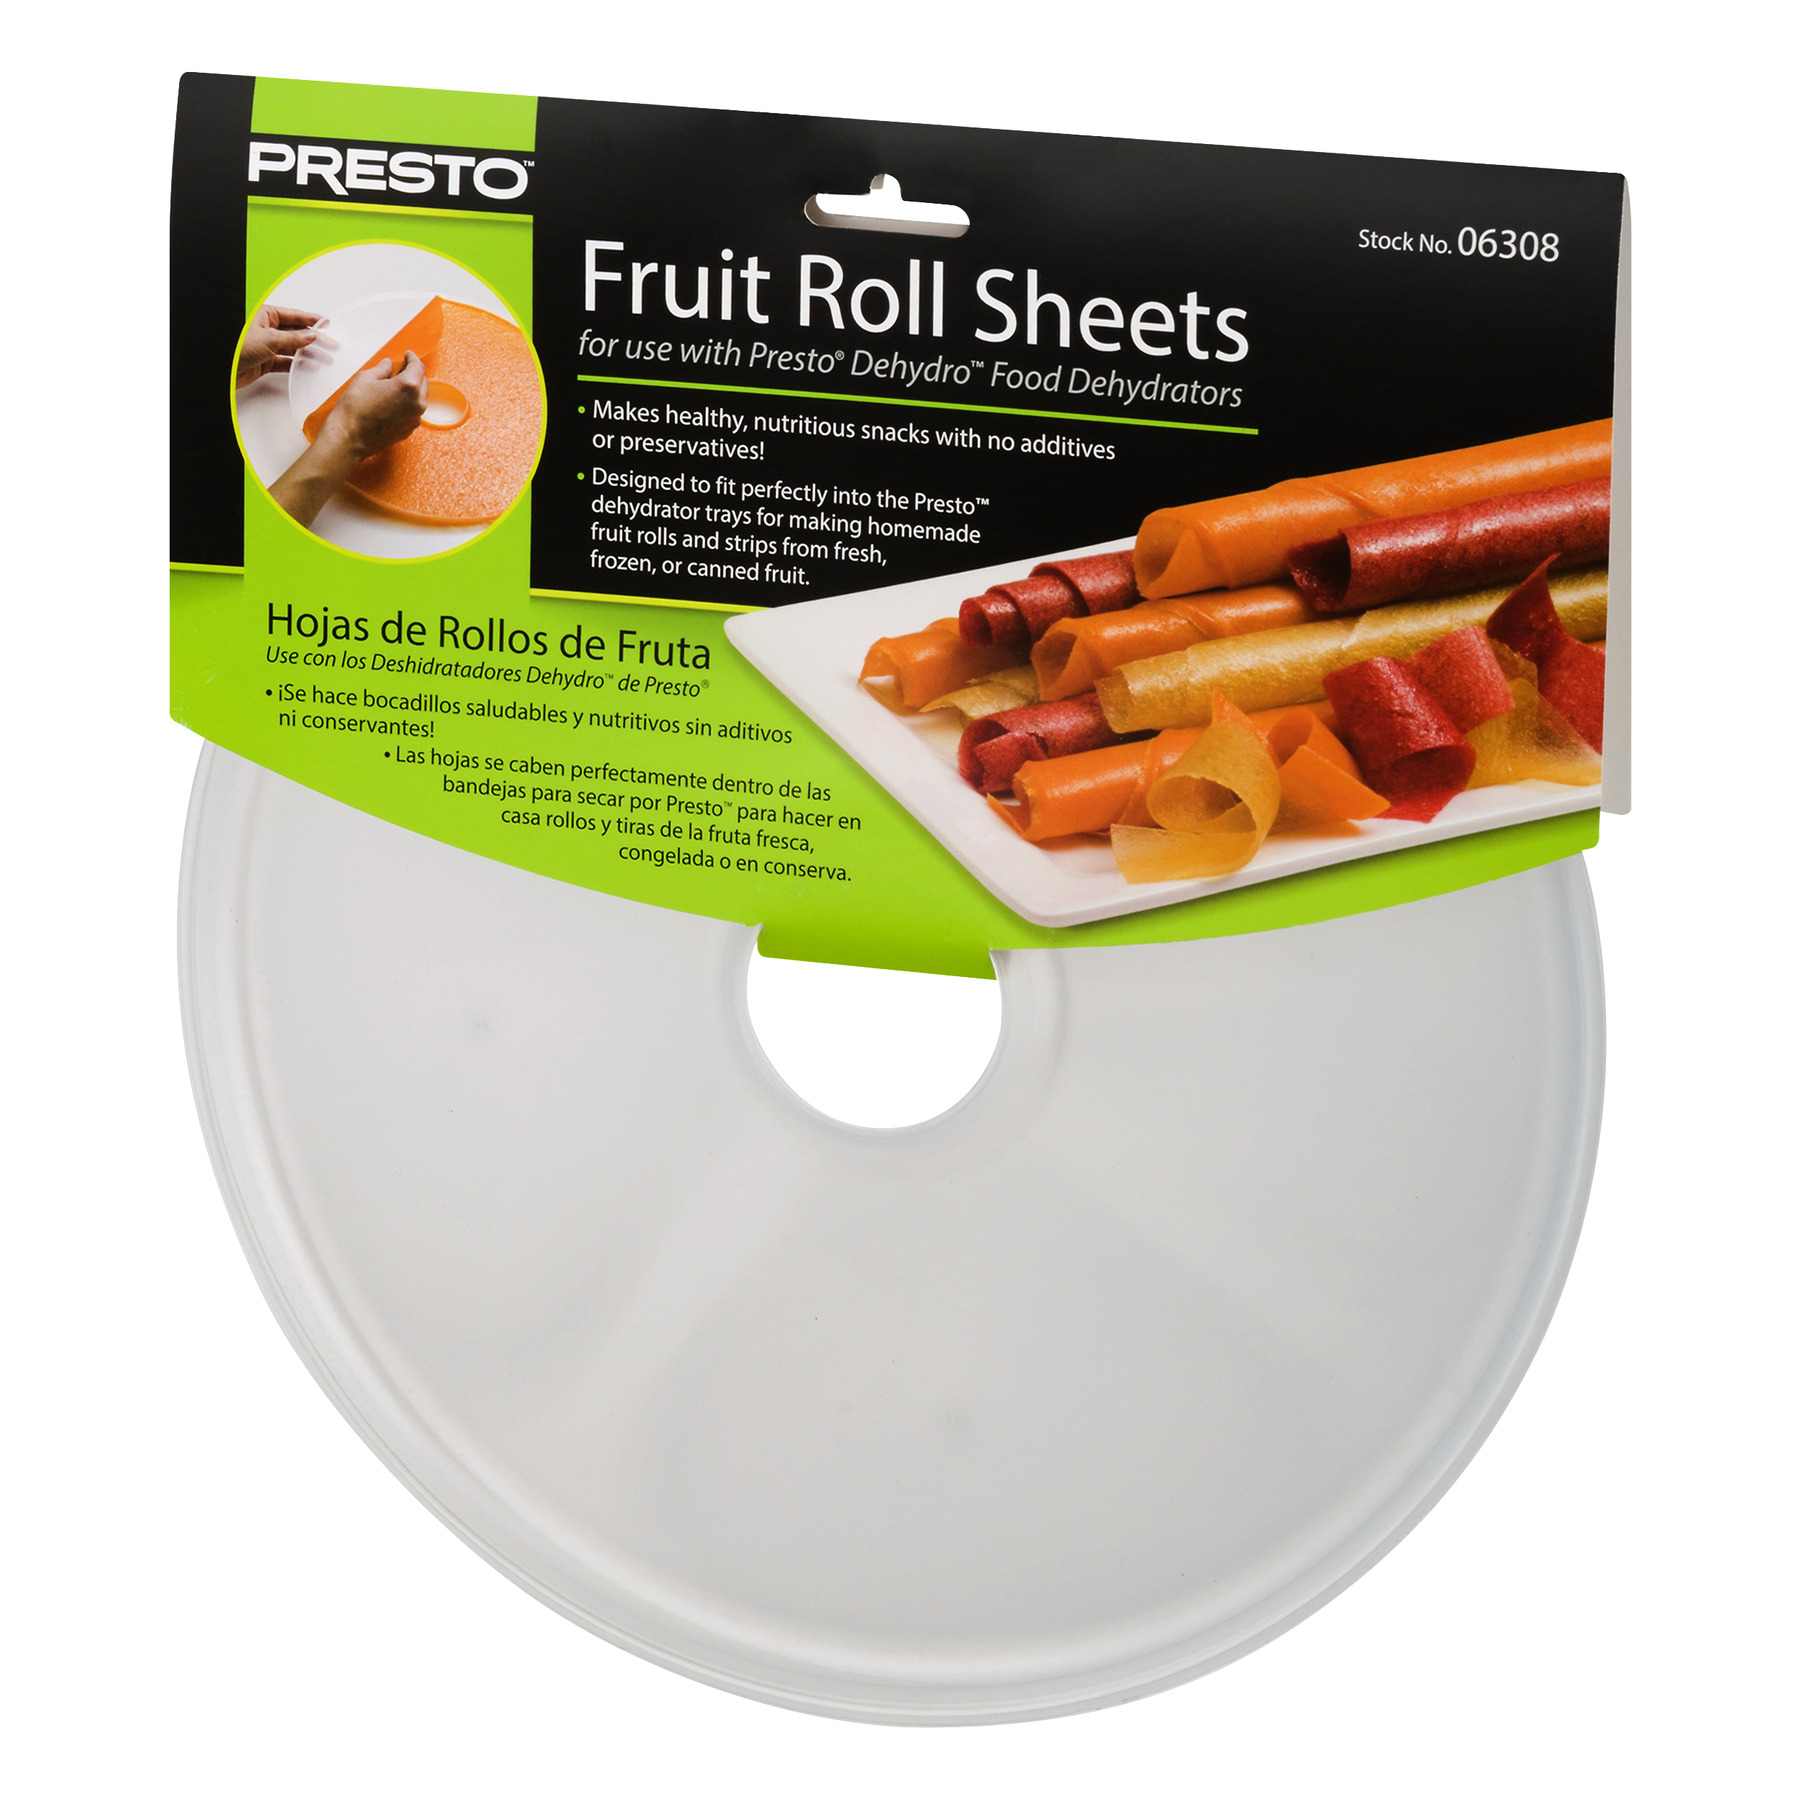 Presto Fruit Rolls Sheets, 2 Count - image 3 of 6